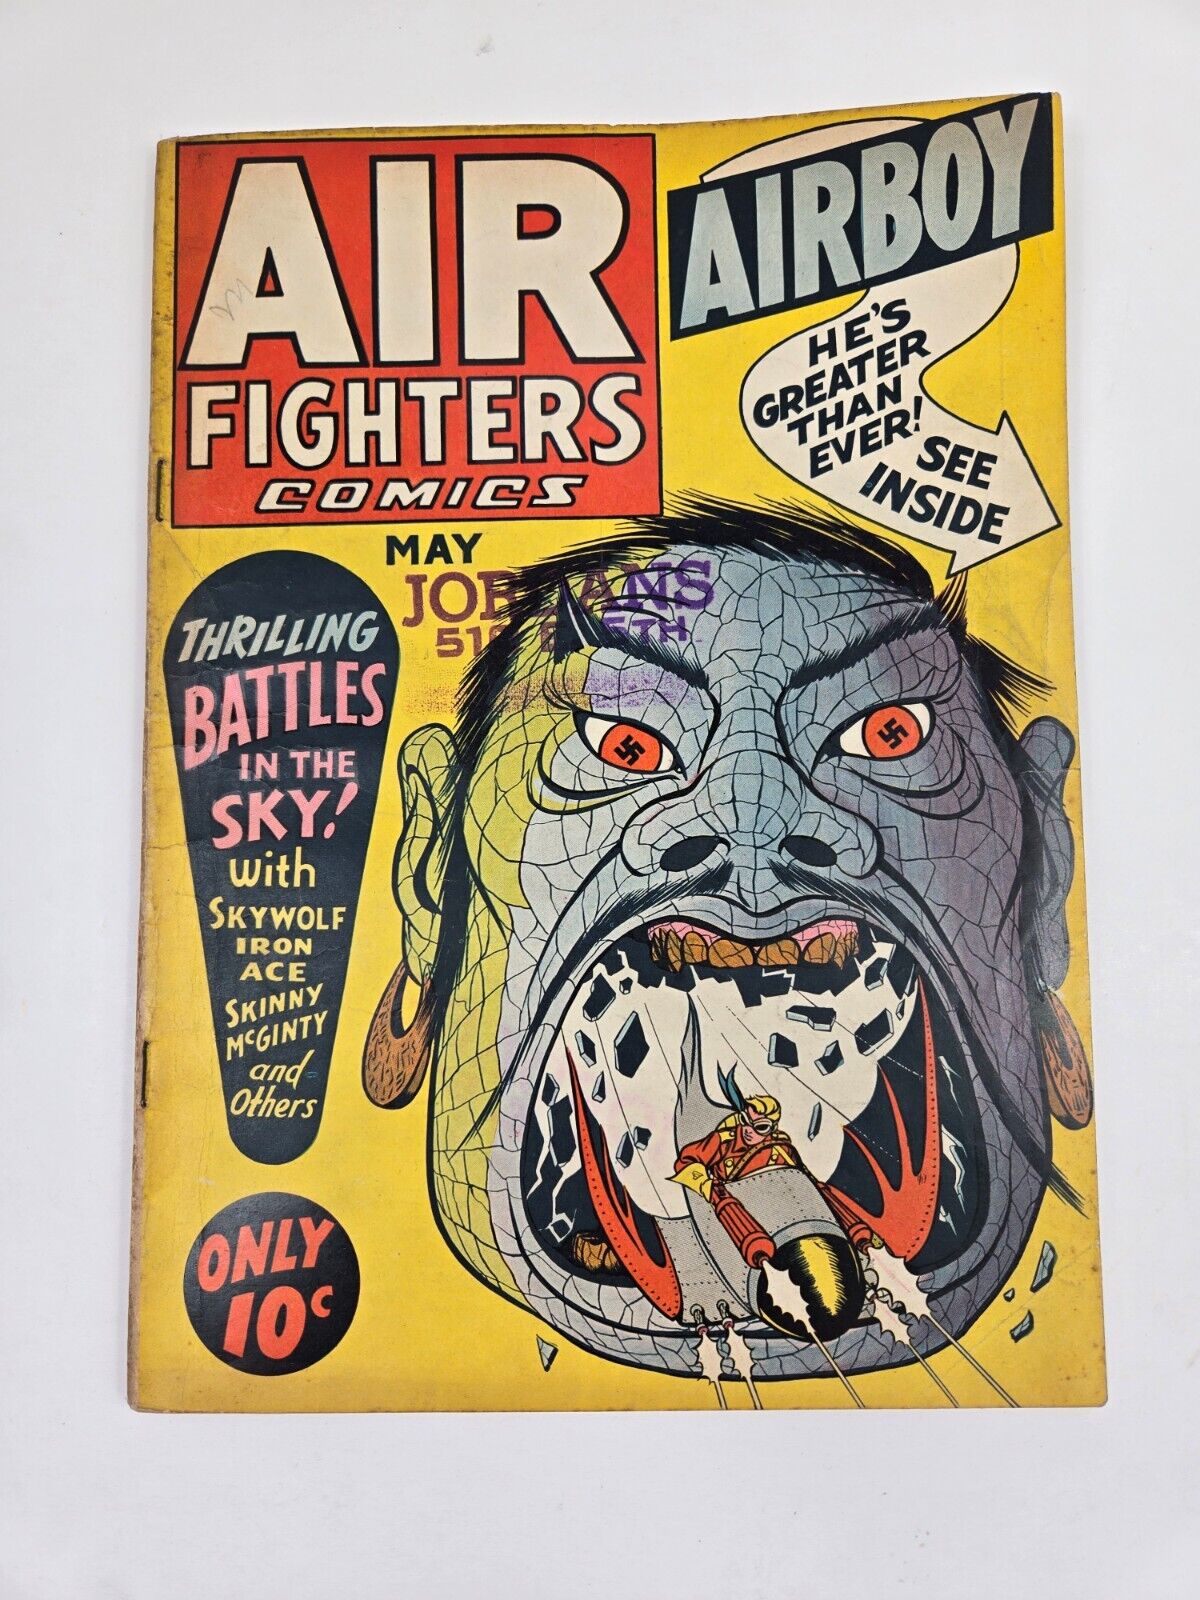 Air Fighters Comics #8 Hillman Periodicals 1943 Golden Age WWII Cover